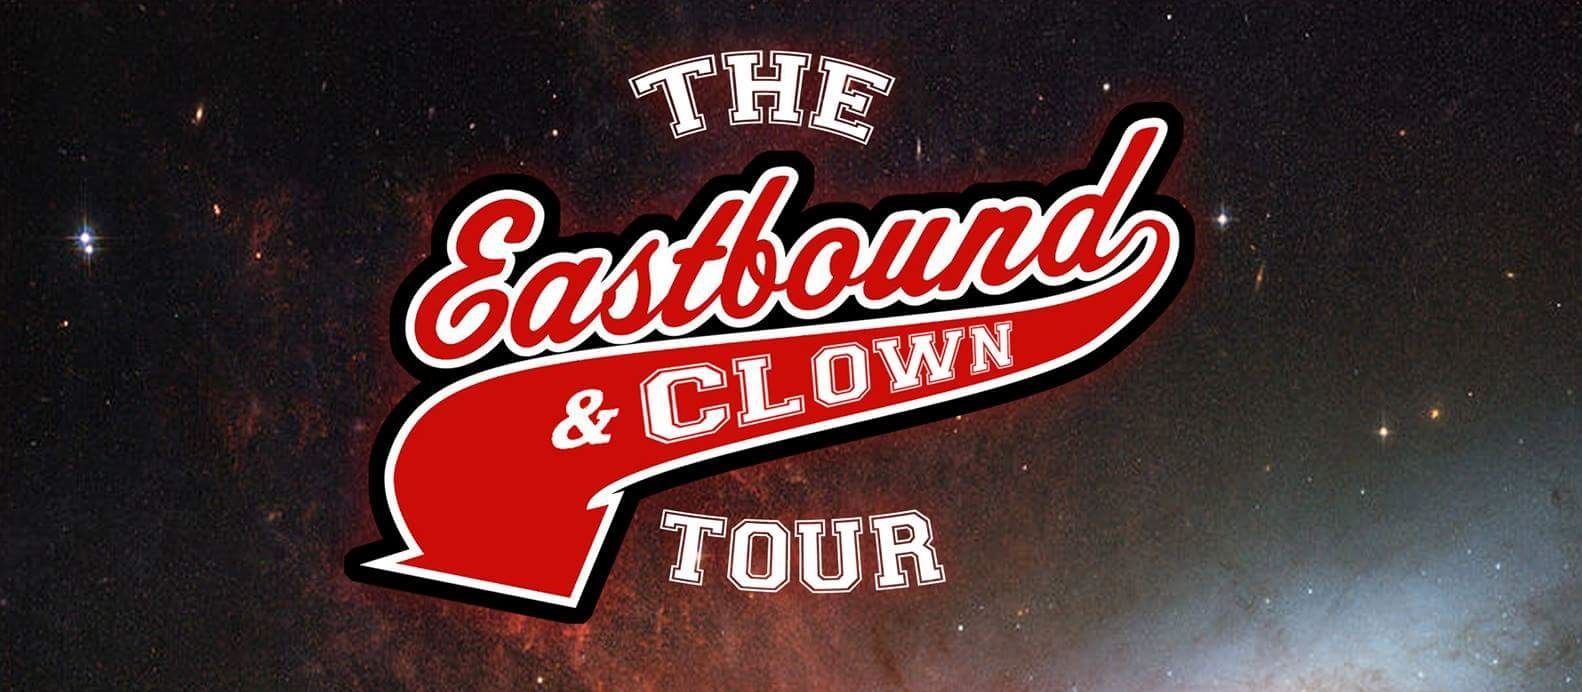 Noesis Announces “The Eastbound and Clown Tour” with Saving Chronos [DTB Sponsored Tour]